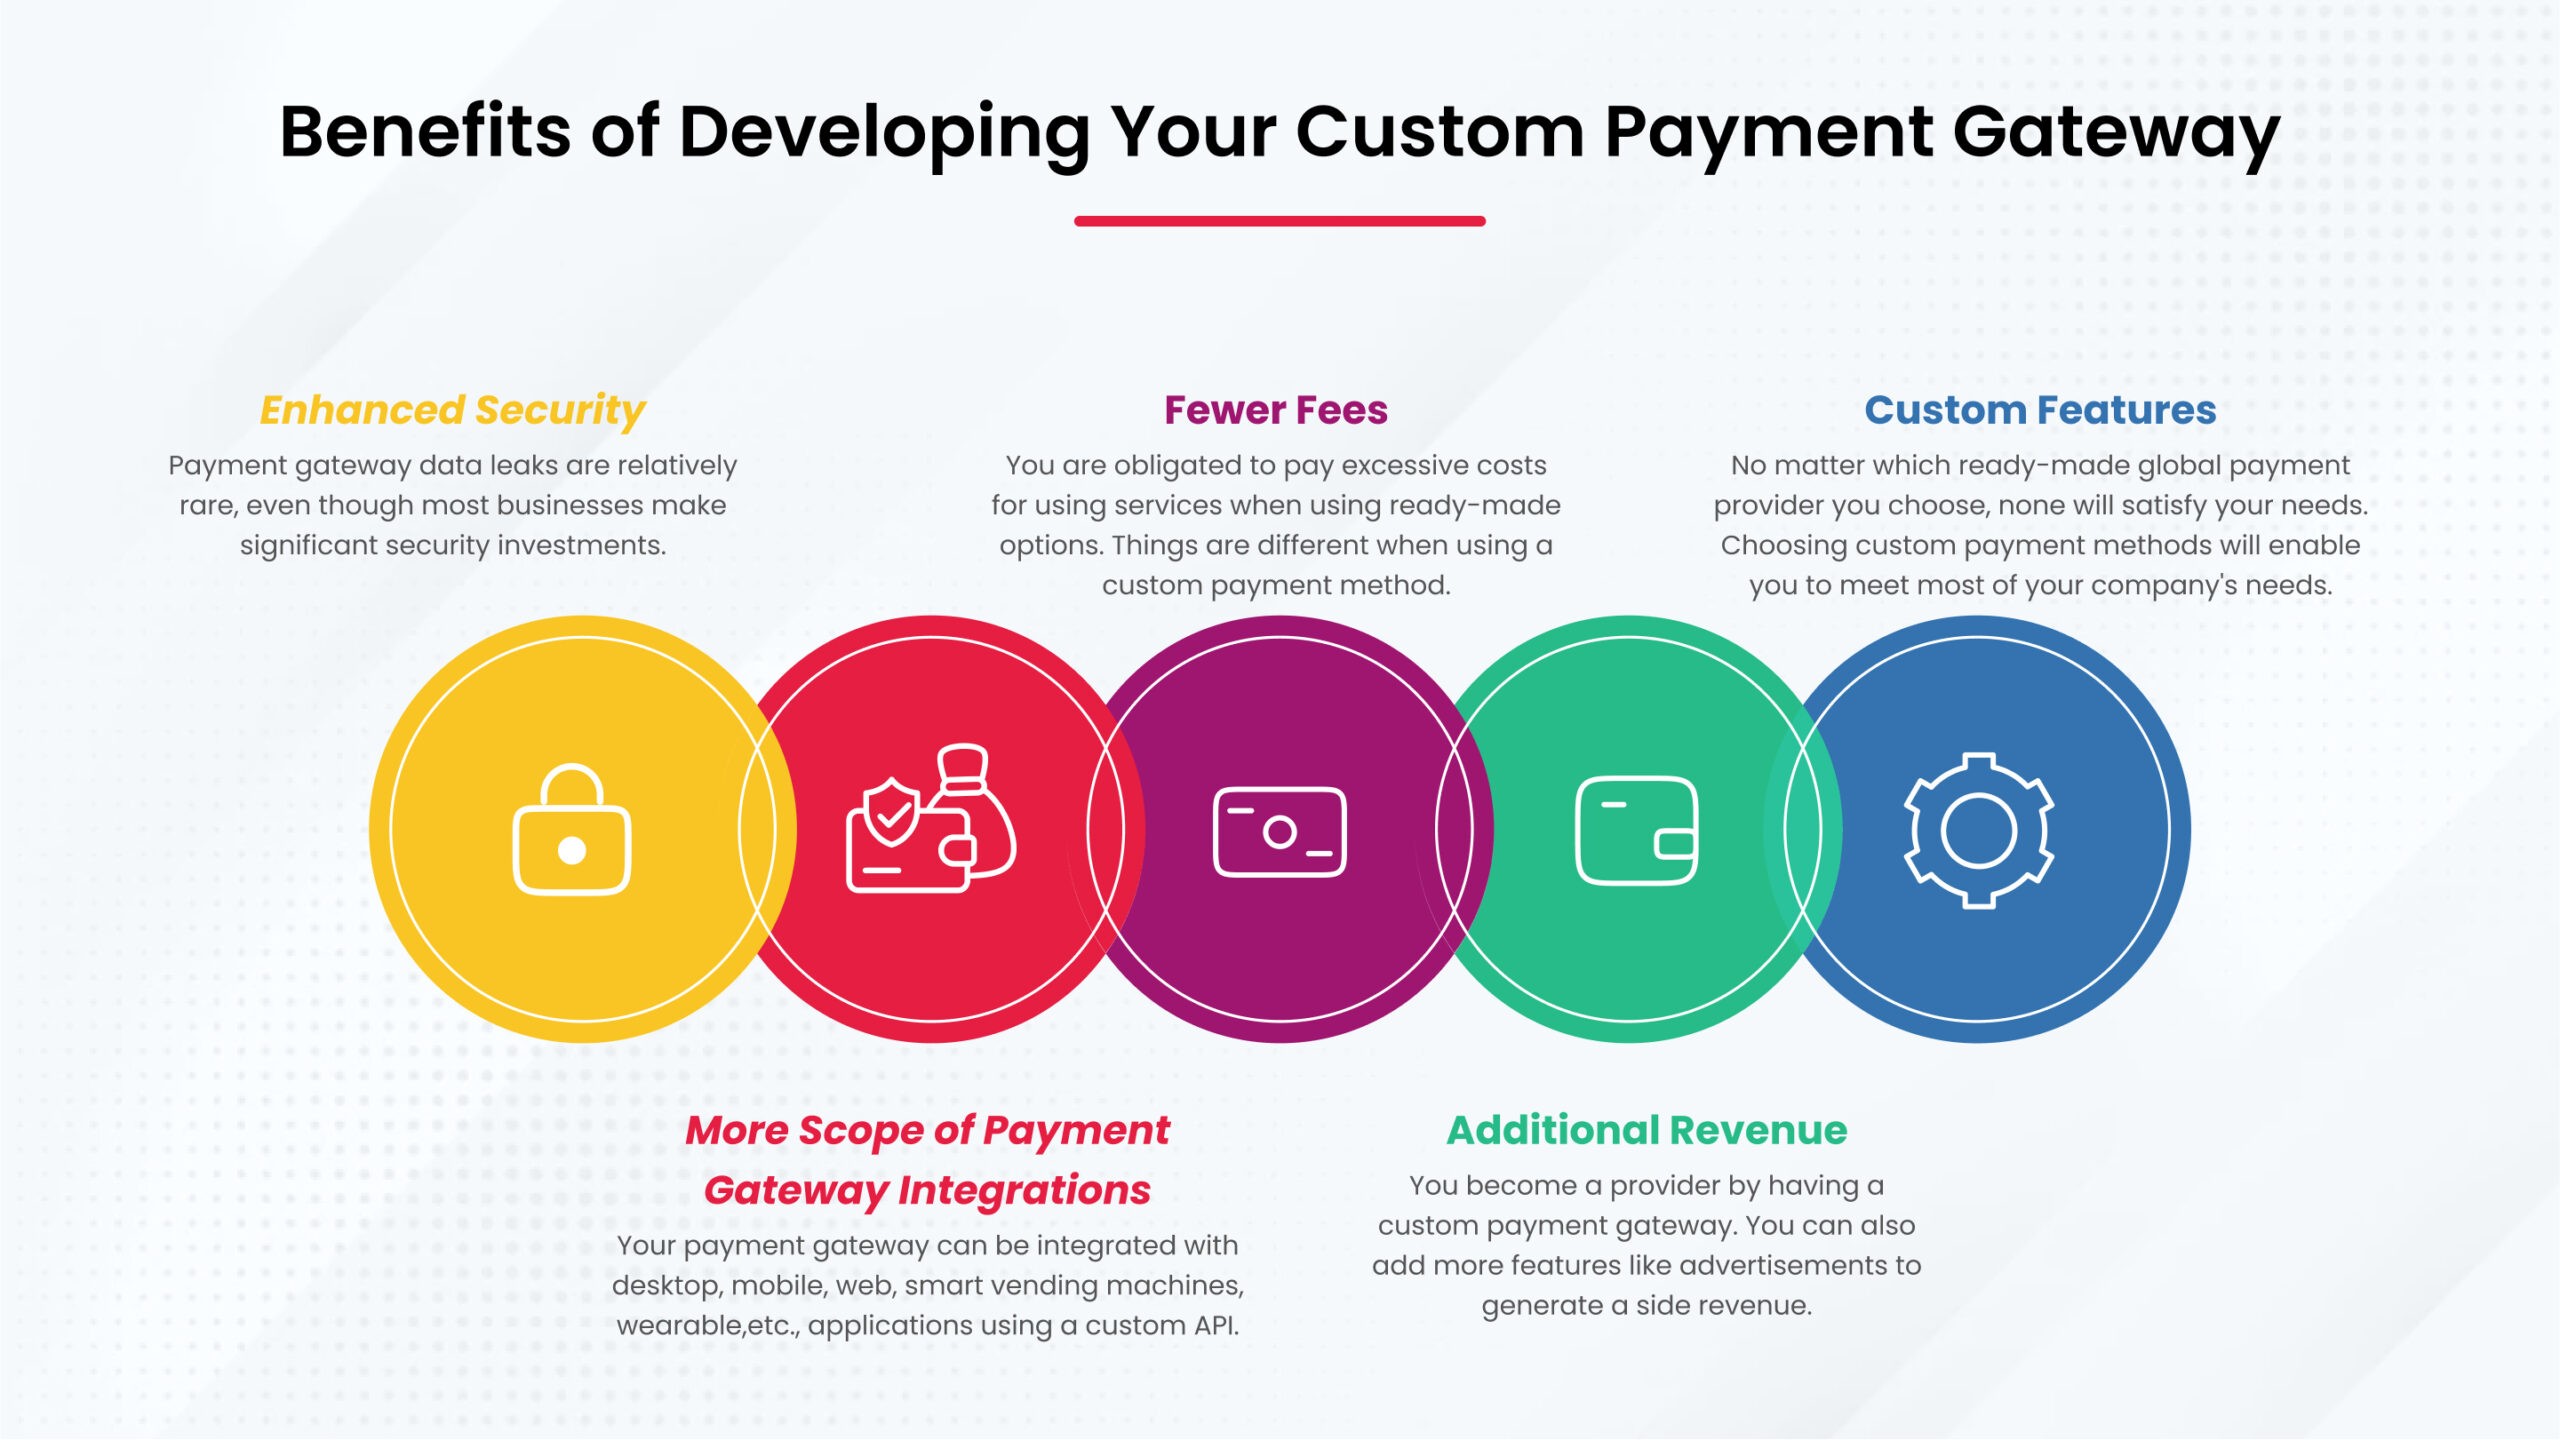 Benefits of Developing Your Custom Payment Gateway